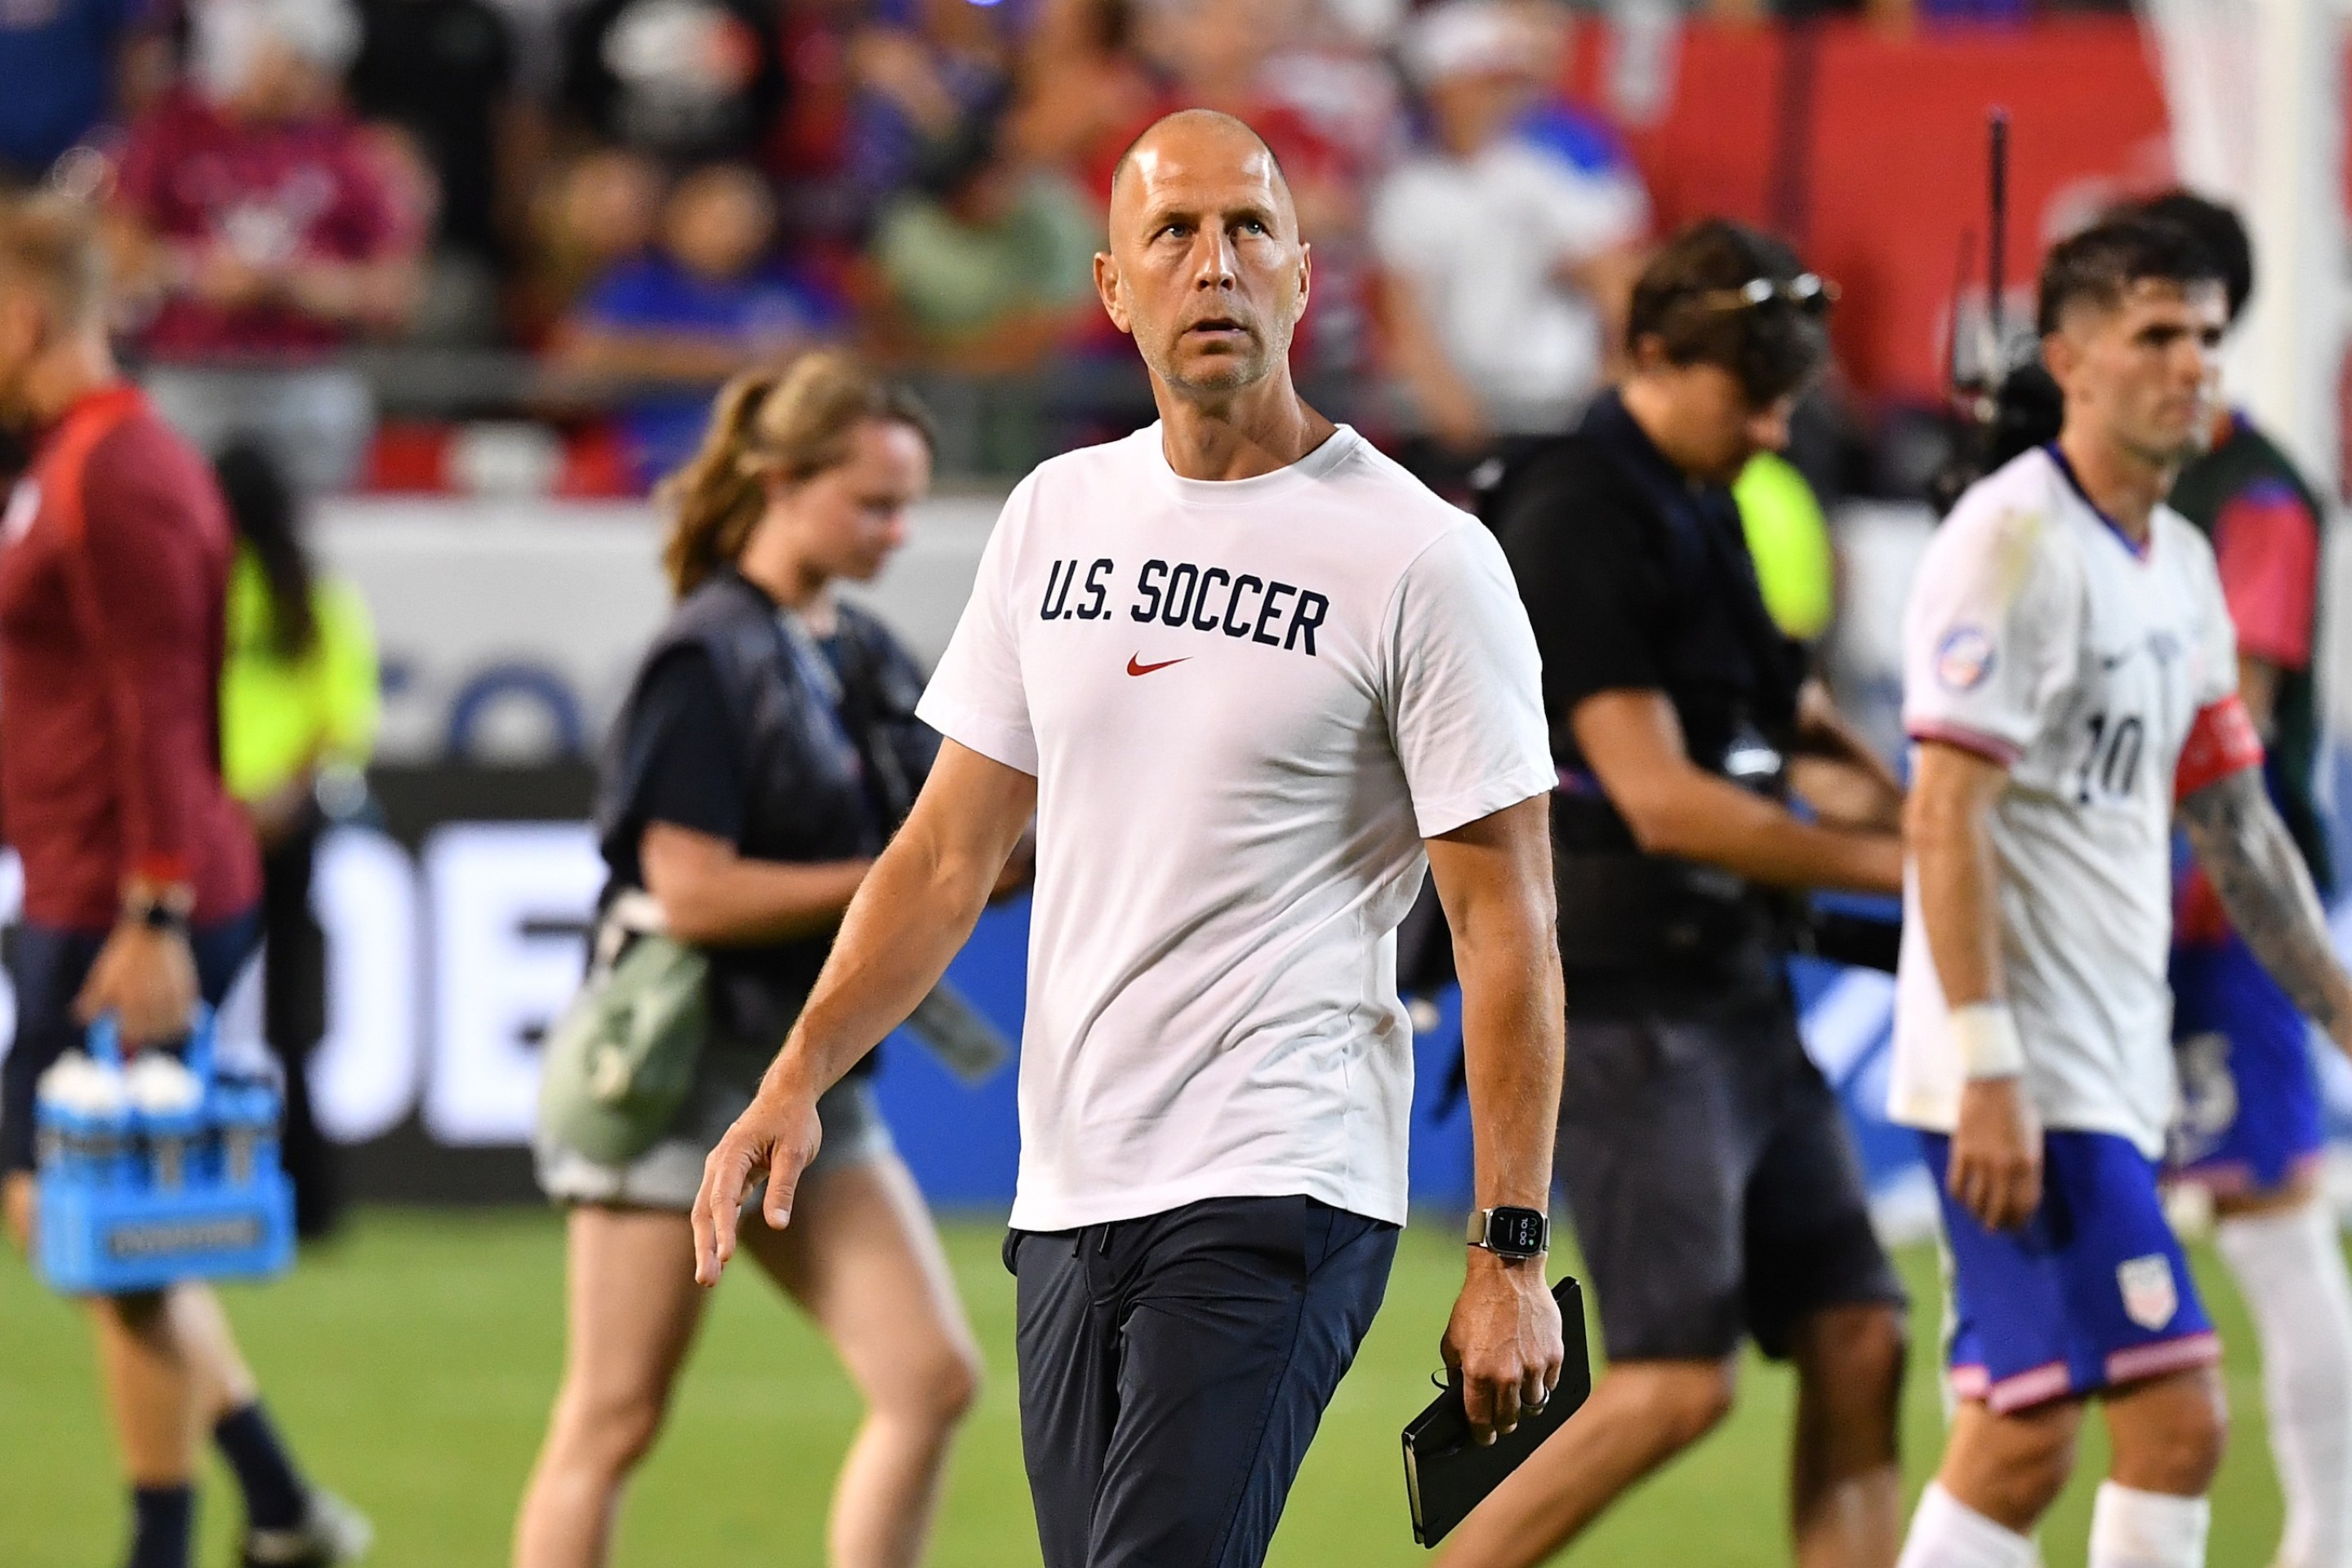 KANSAS CITY, MISSOURI - JULY 1: United States Head Coach Gregg Berhalter walks across the field at the end of the CONMEBOL Copa America group C match between the United States and Uruguay at GEHA Field at Arrowhead Stadium on July 1, 2024 in Kansas City, Missouri. (Photo by Bill Barrett/ISI Photos/USSF/Getty Images for USSF)KANSAS CITY, MISSOURI - JULY 1: during the CONMEBOL Copa America group C match between the United States and Uruguay at GEHA Field at Arrowhead Stadium on July 1, 2024 in Kansas City, Missouri. (Photo by Bill Barrett/ISI Photos/USSF/Getty Images for USSF)